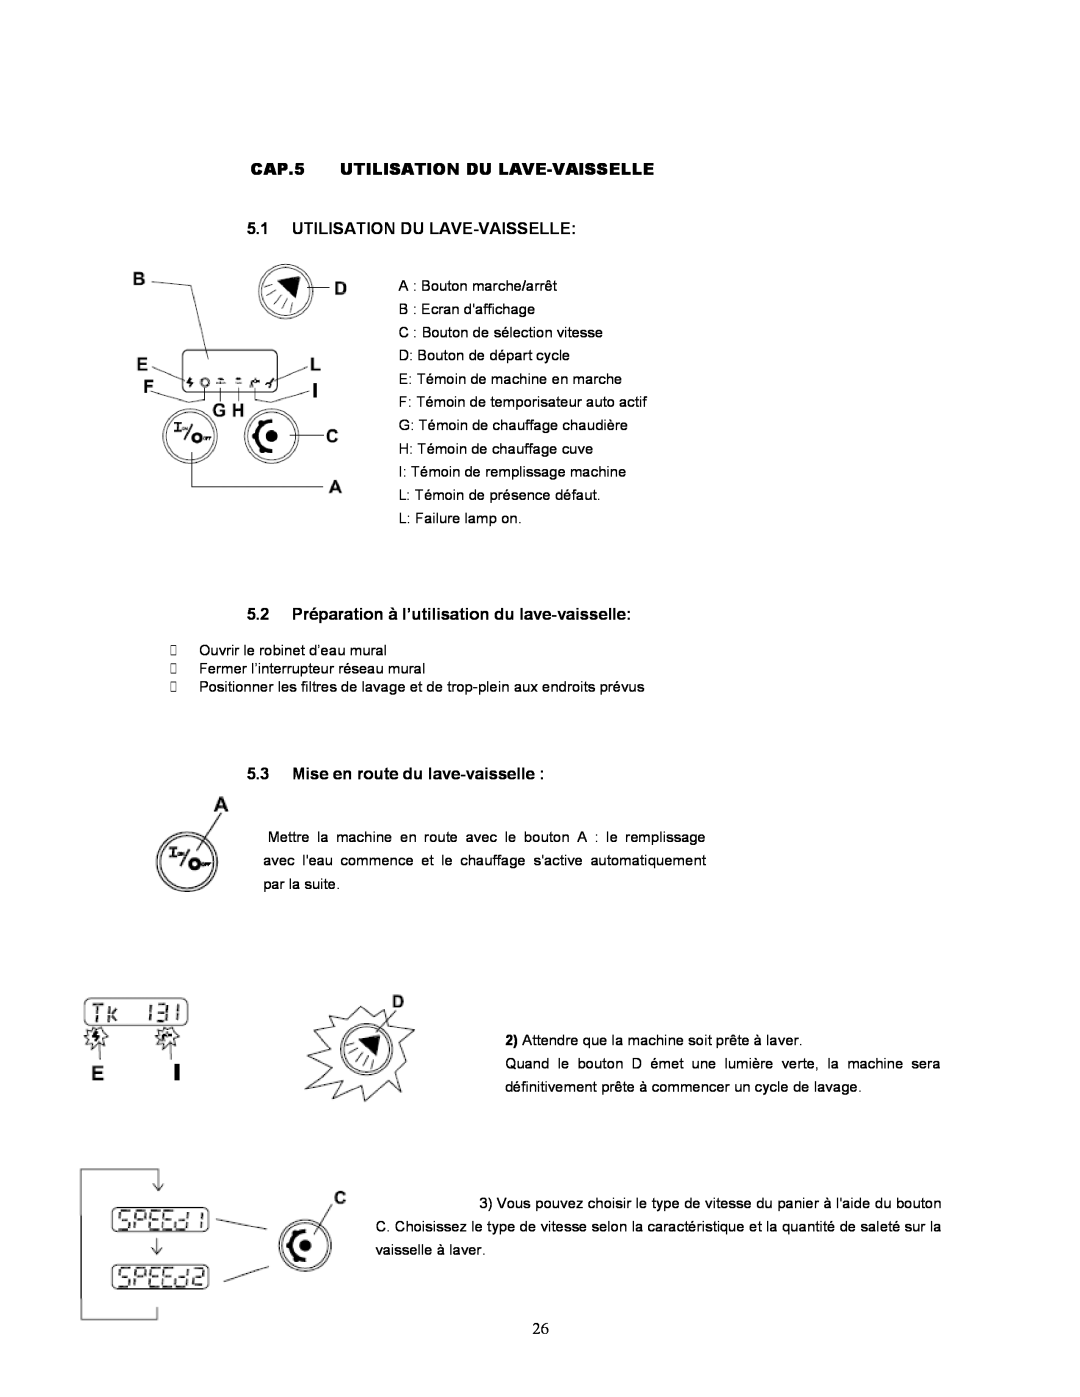 Jettech Metal Products FX-44 operation manual CAP.5 UTILISATION DU LAVE-VAISSELLE 5.1 UTILISATION DU LAVE-VAISSELLE 